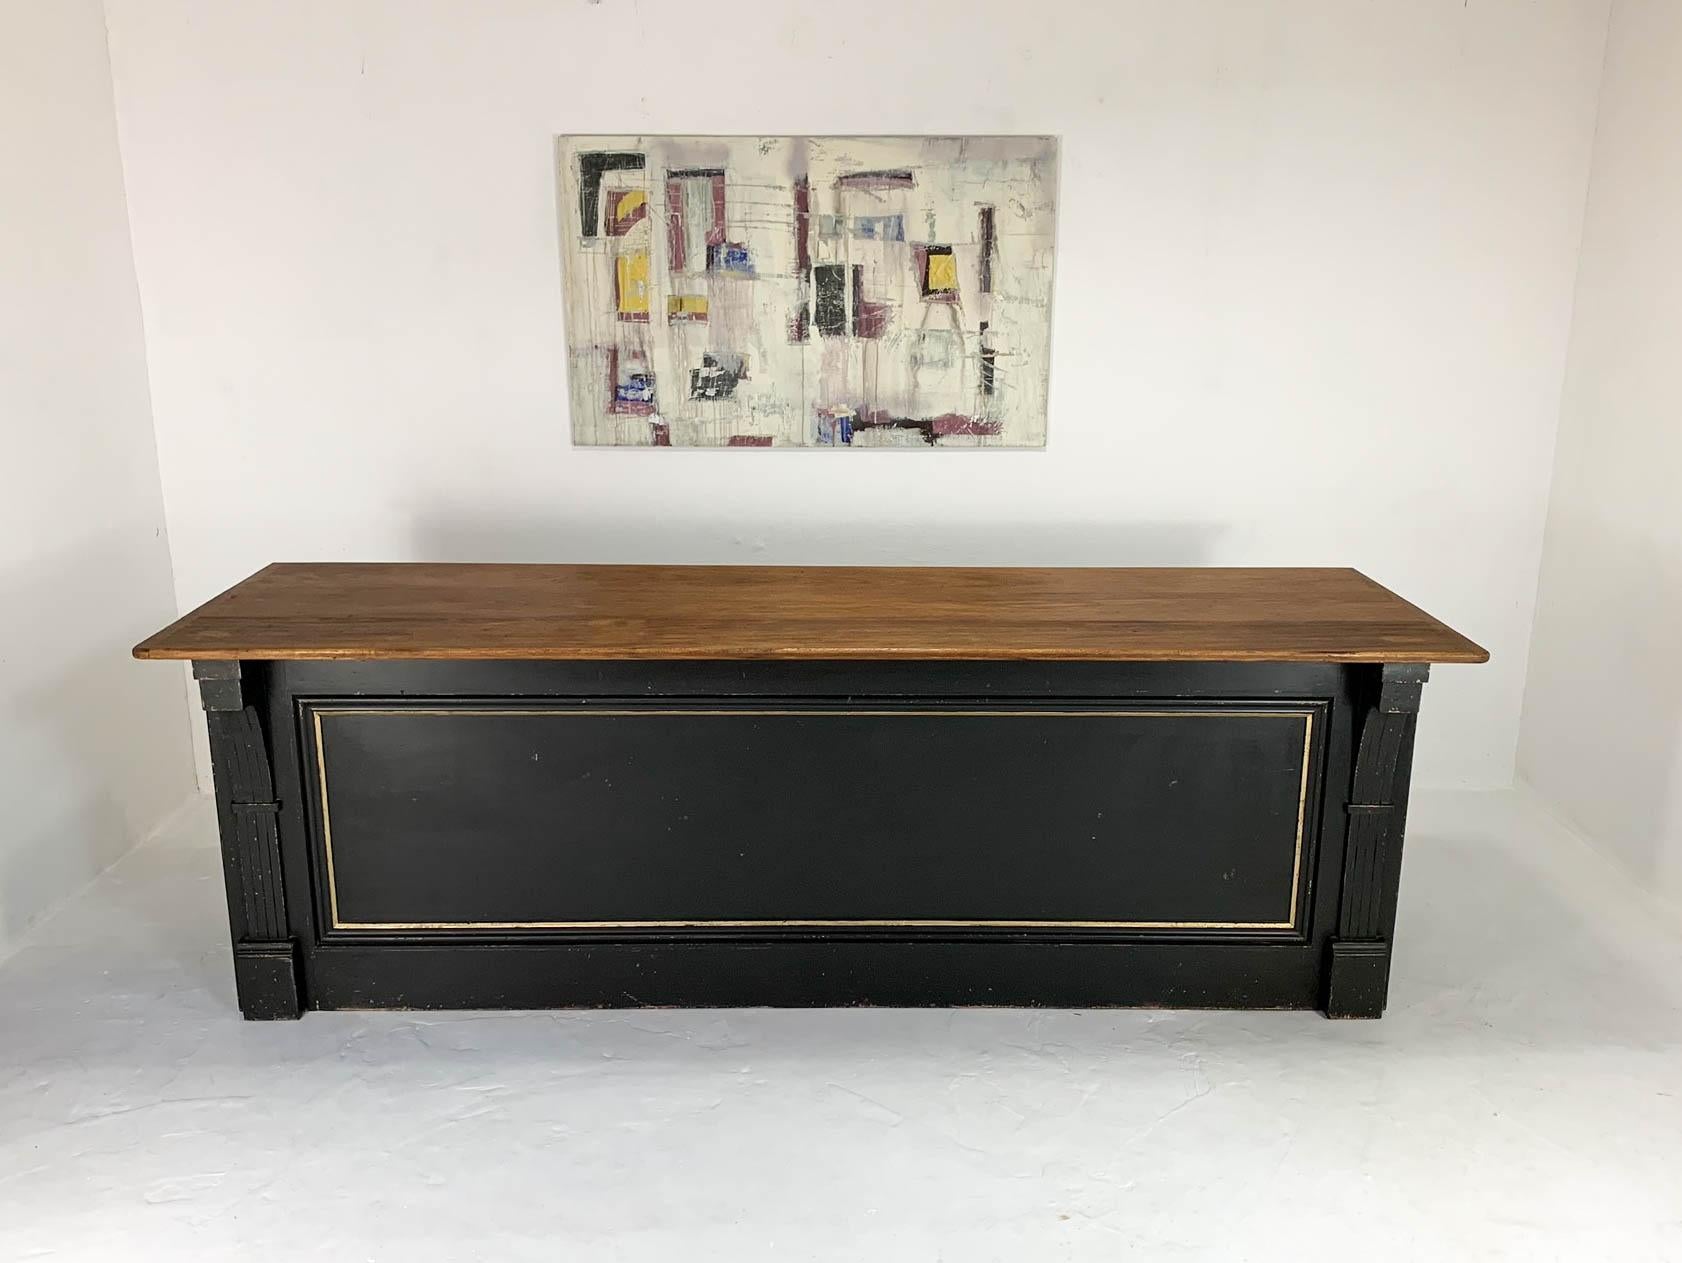 Stunning pine shop counter that has been fully restored using reclaimed and some new materials. The counter has been painted black with gold to highlight the moldings on the paneled front. Corbels at either end enhance the decorative look of the